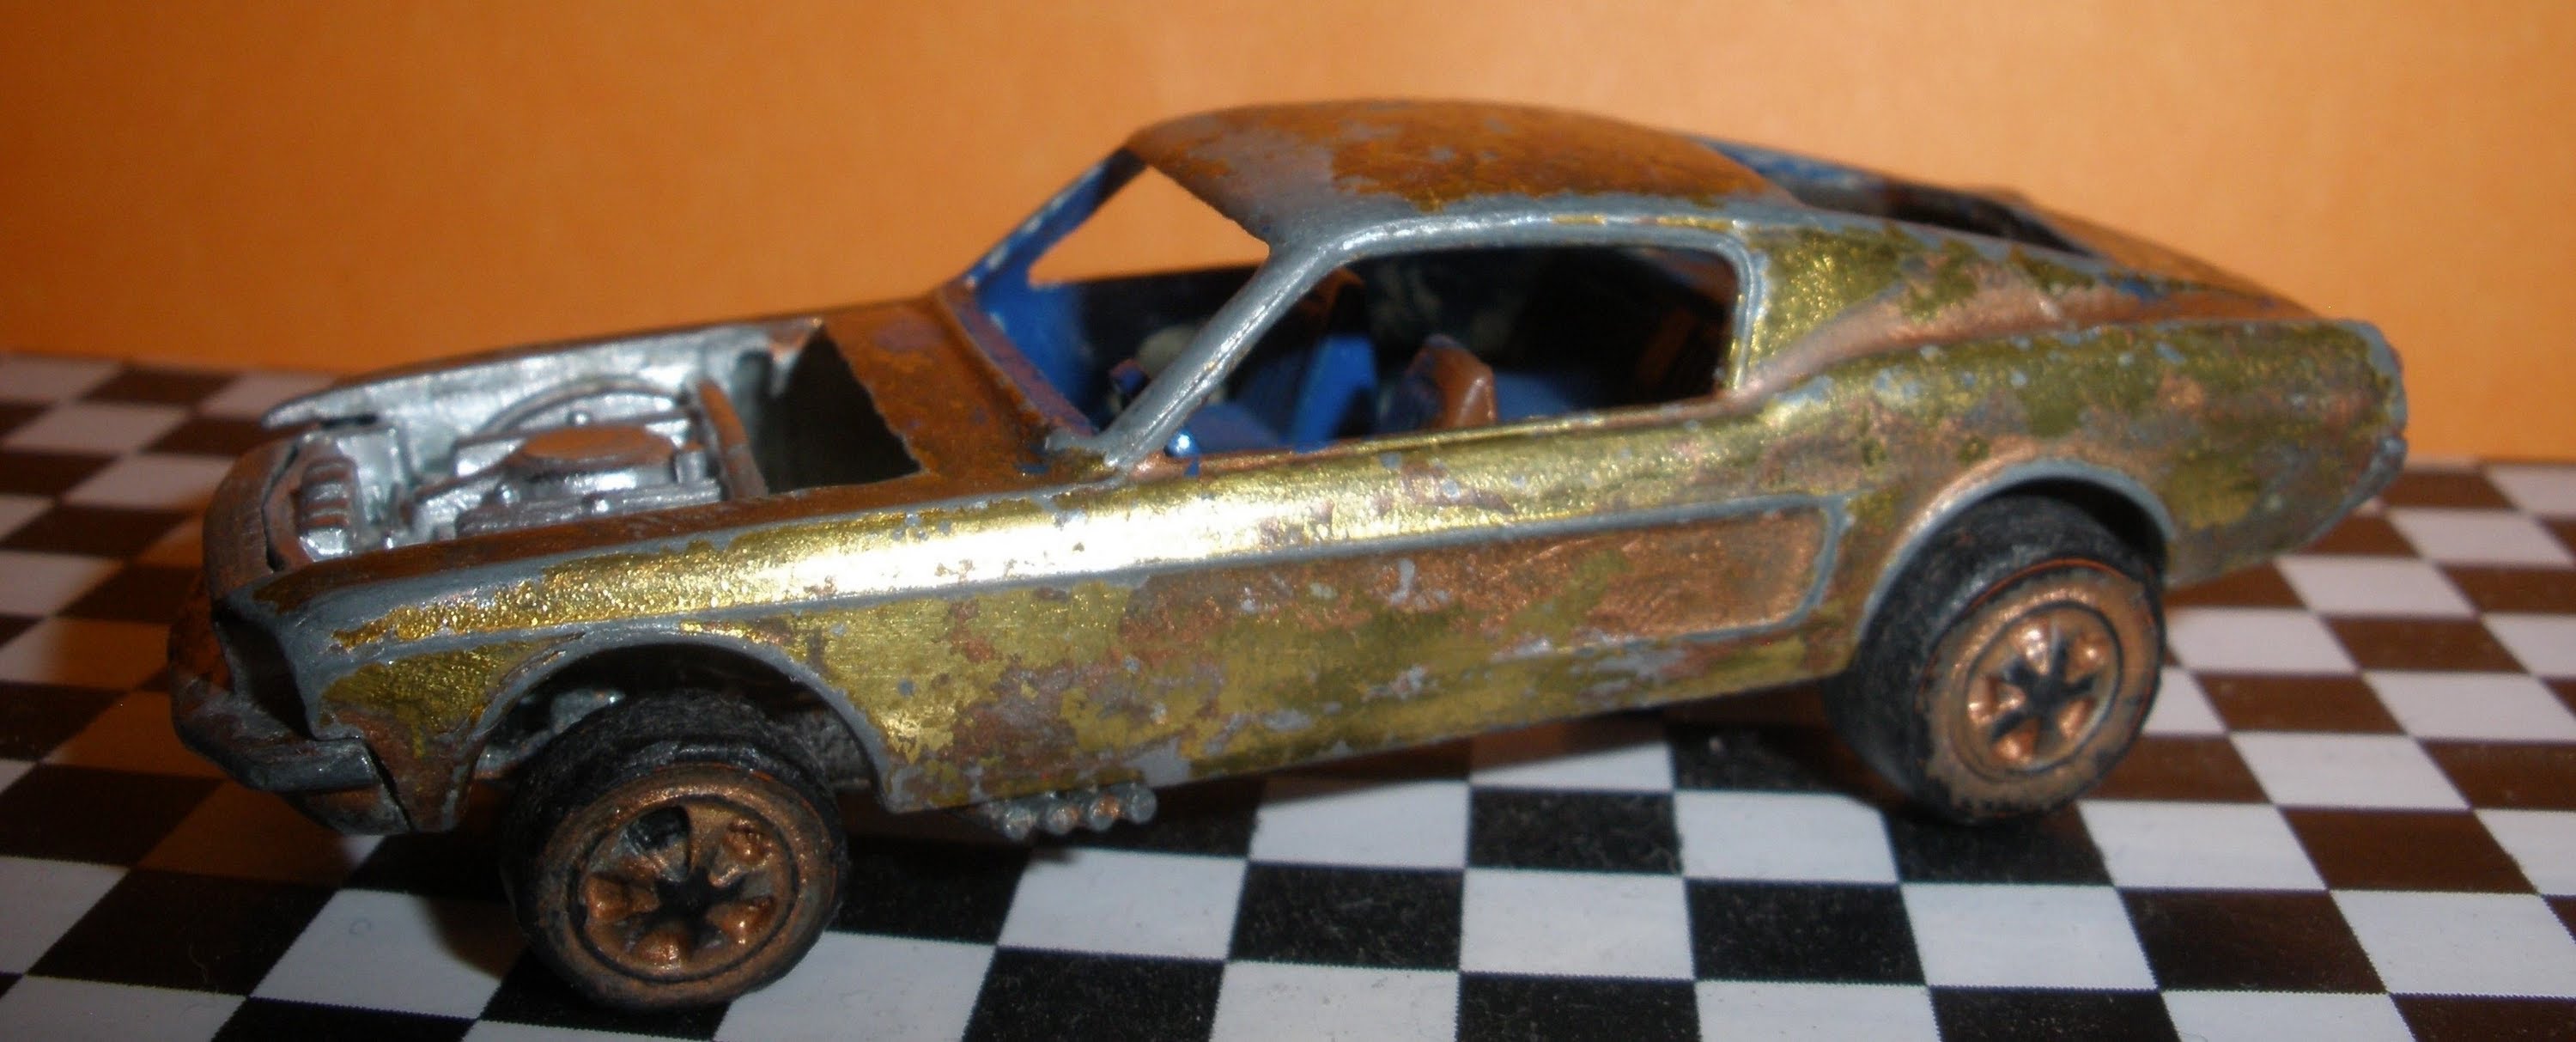 Old Hot Wheels, Matchbox, Tootsie Toy Cars, and More Found at Garage ...